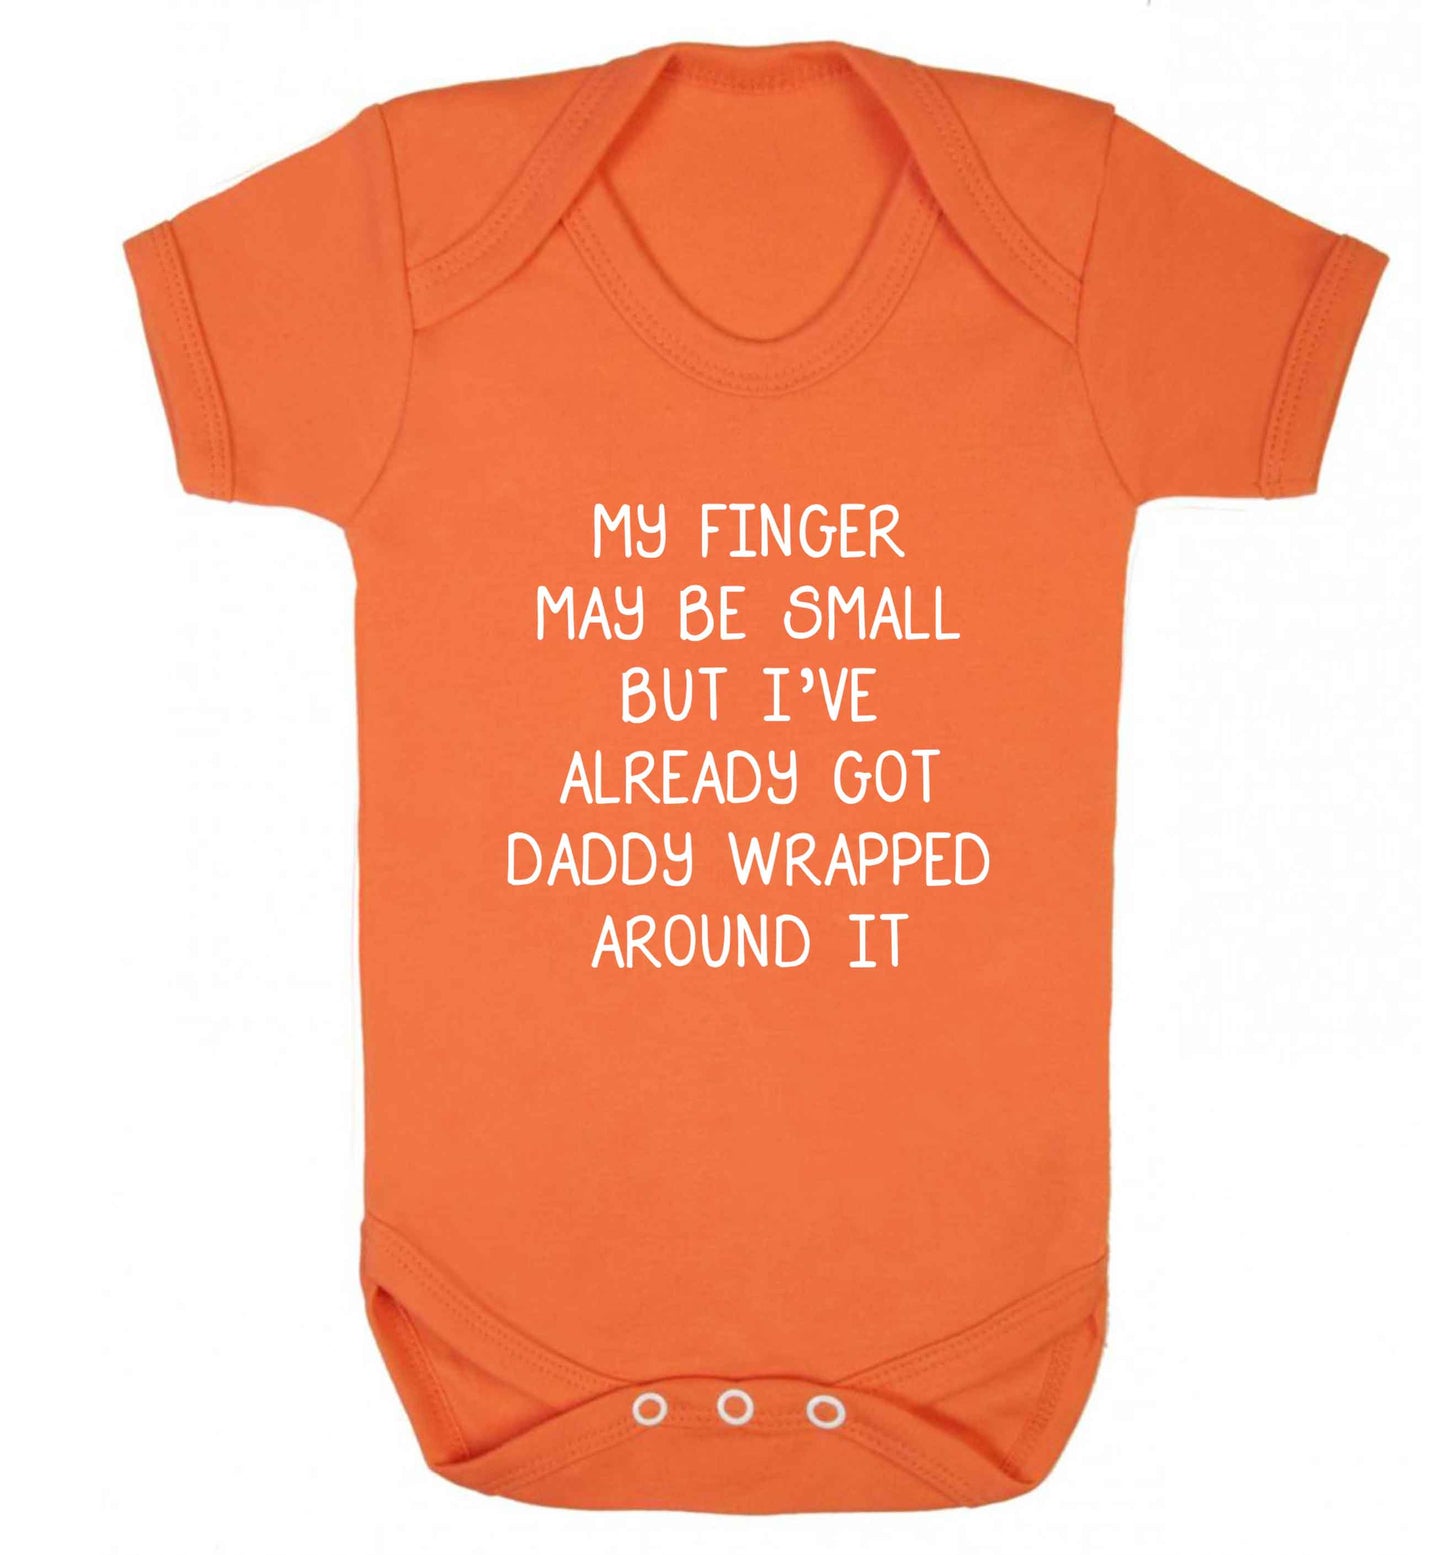 My finger may be small but I've already got daddy wrapped around it baby vest orange 18-24 months